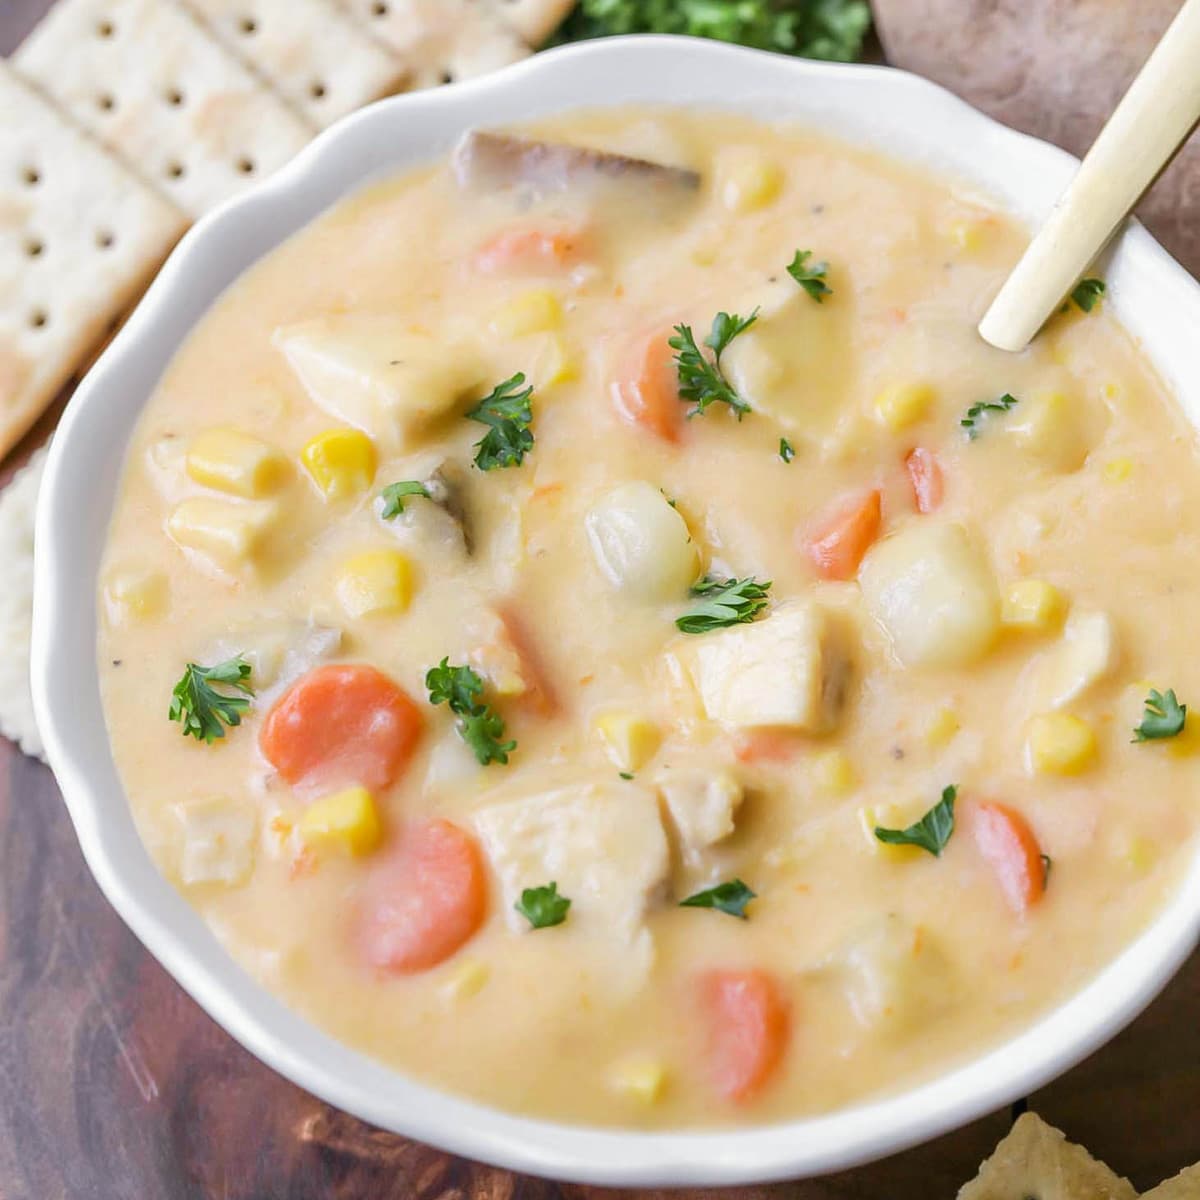 Leftover turkey recipes - chicken corn chowder served in a bowl.